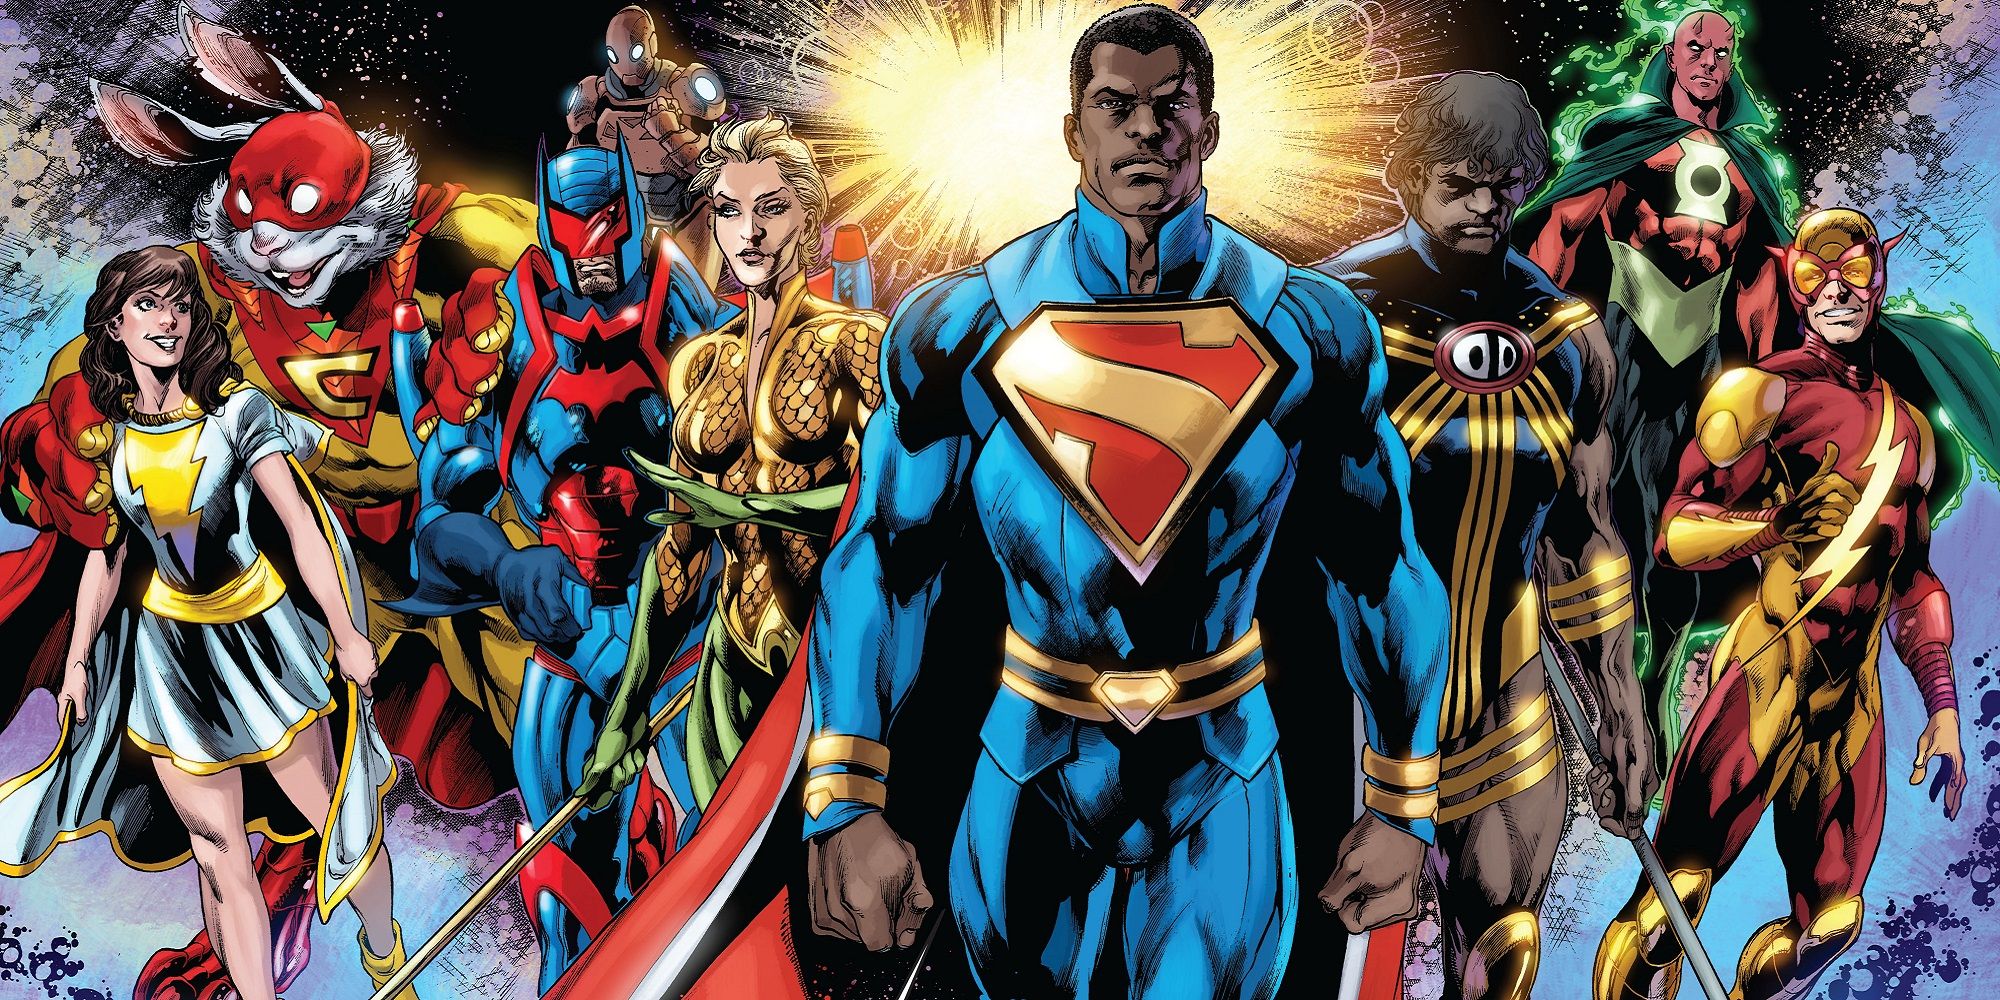 Images from DC Comics Multiversity by Grant Morrison.